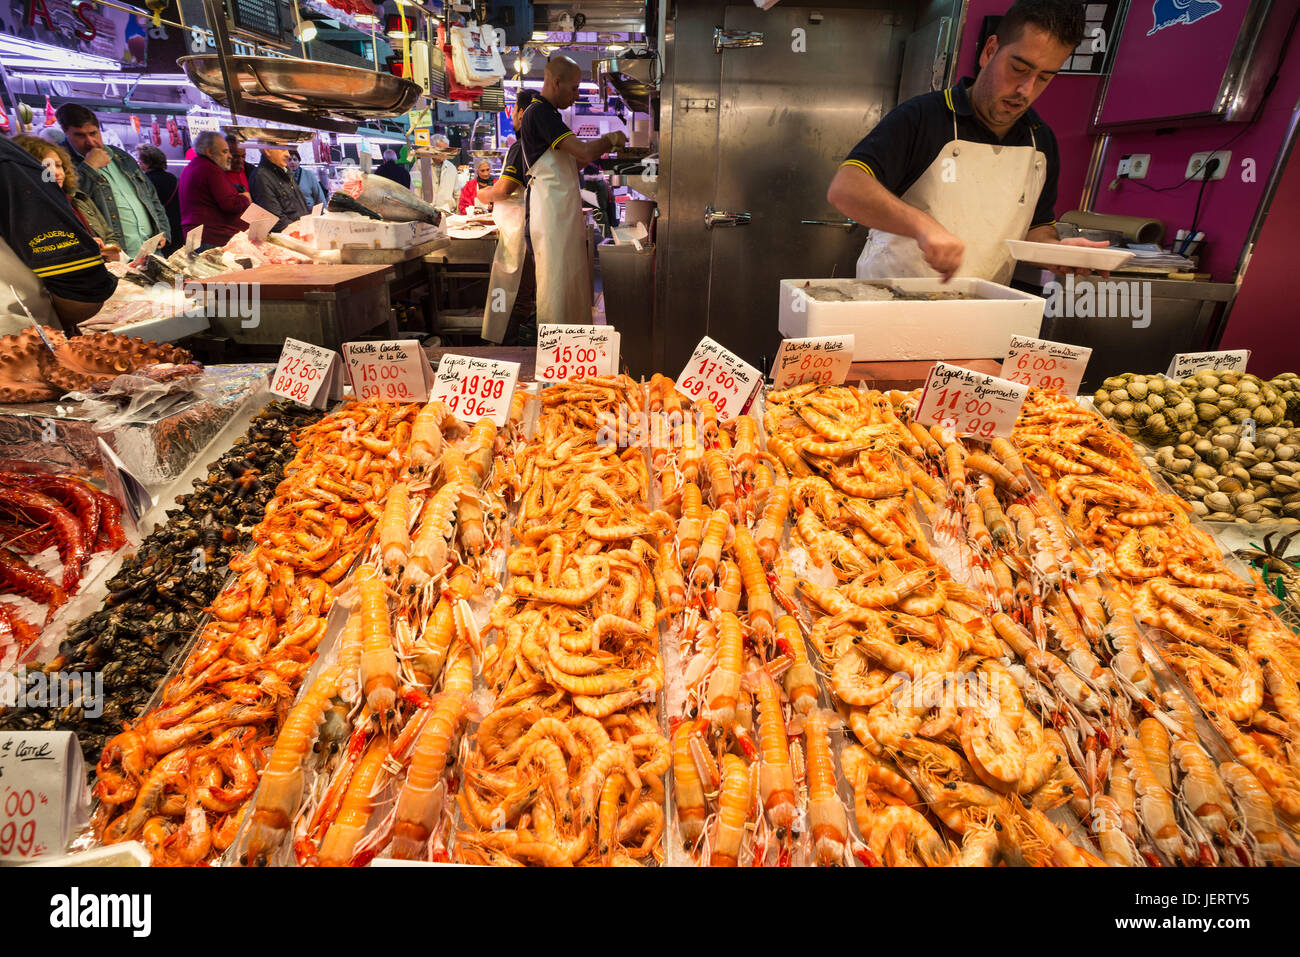 Seafood from all over Spain on sale in the Mercardo de Maravillas, one of the largest food markets in Europe.  Cuatro Caminos, Madrid, Spain Stock Photo